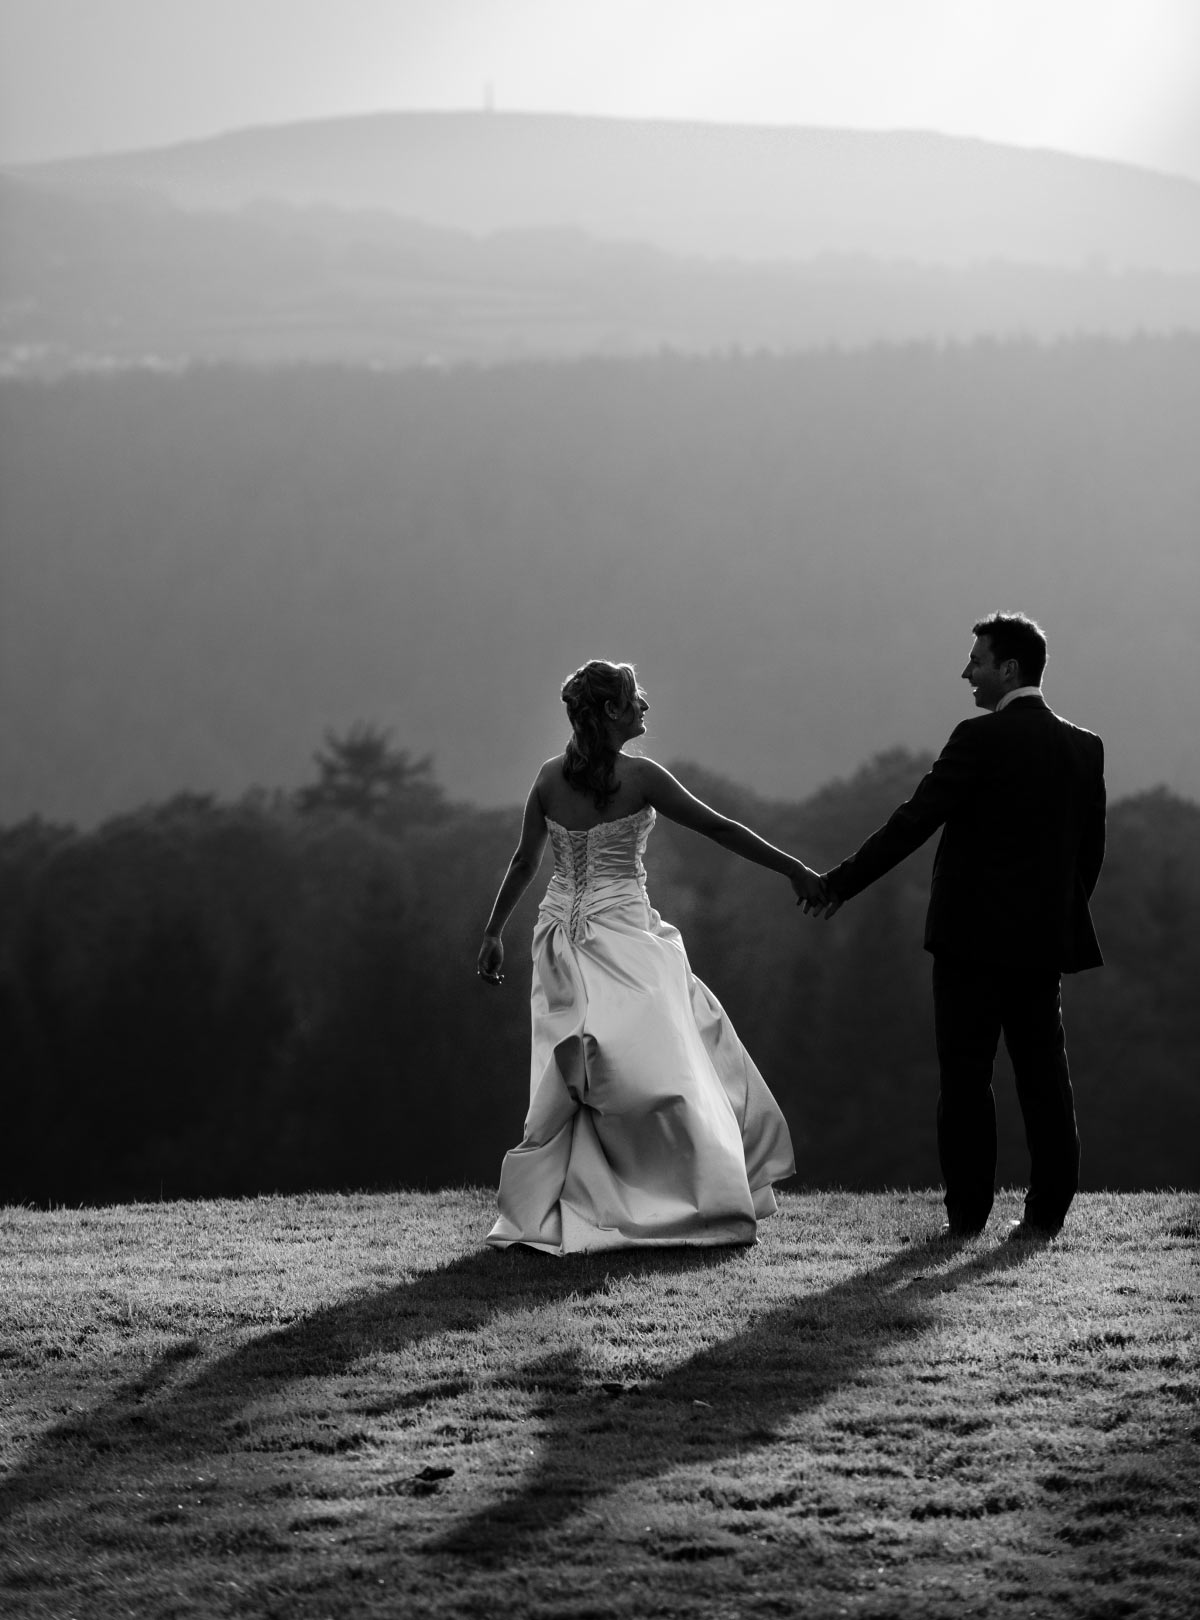 Special winter wedding offer at The Horn of Plenty